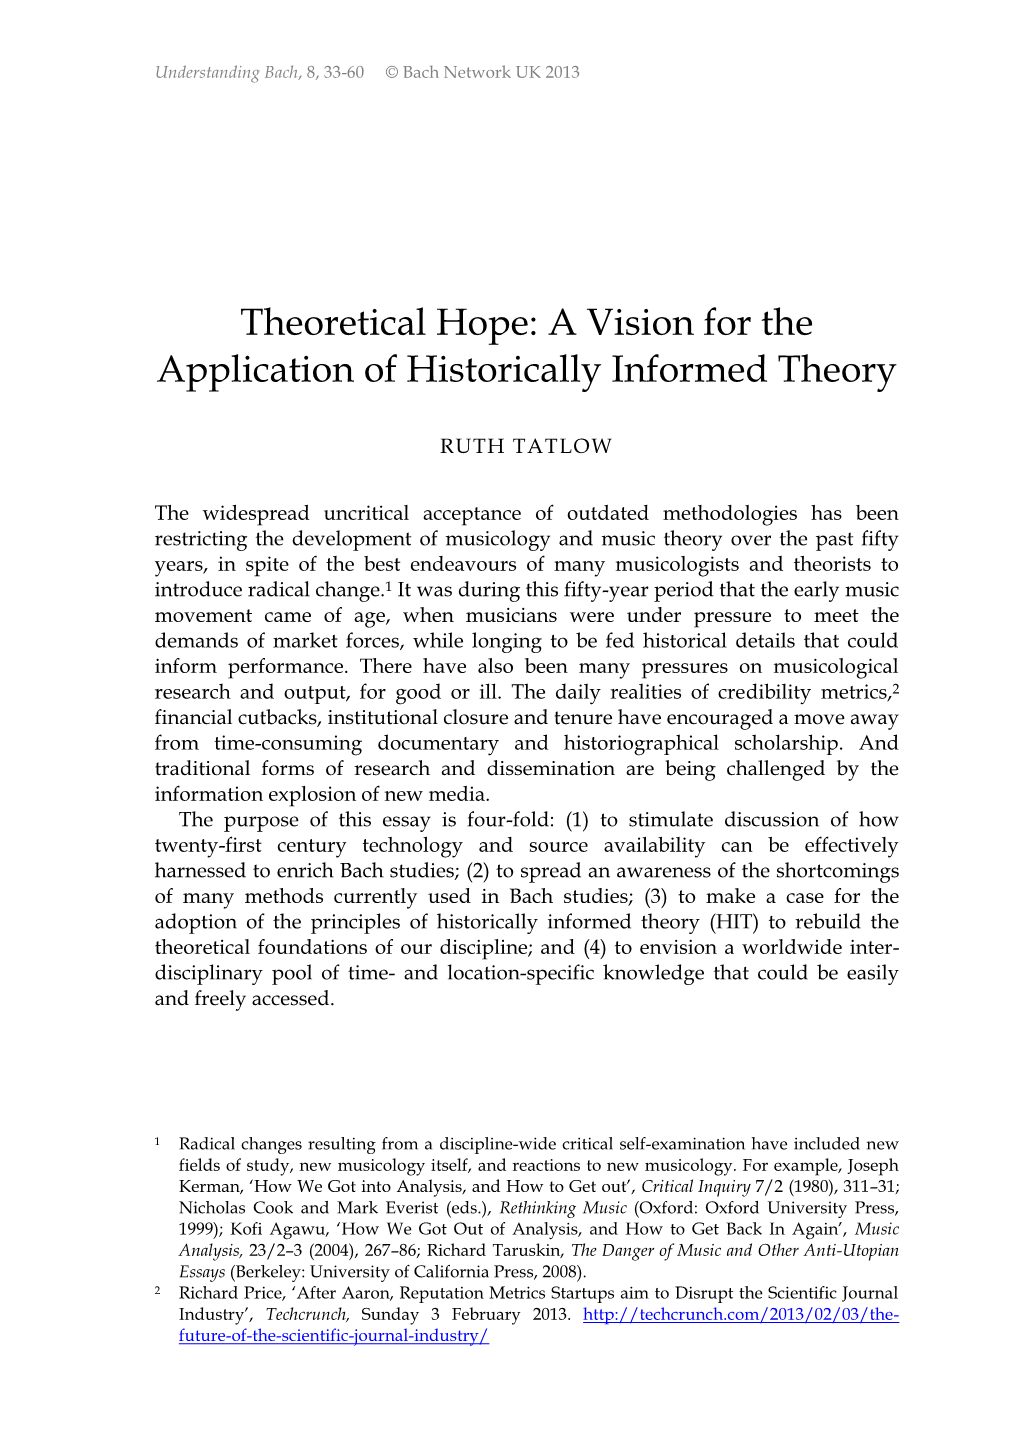 Theoretical Hope: a Vision for the Application of Historically Informed Theory